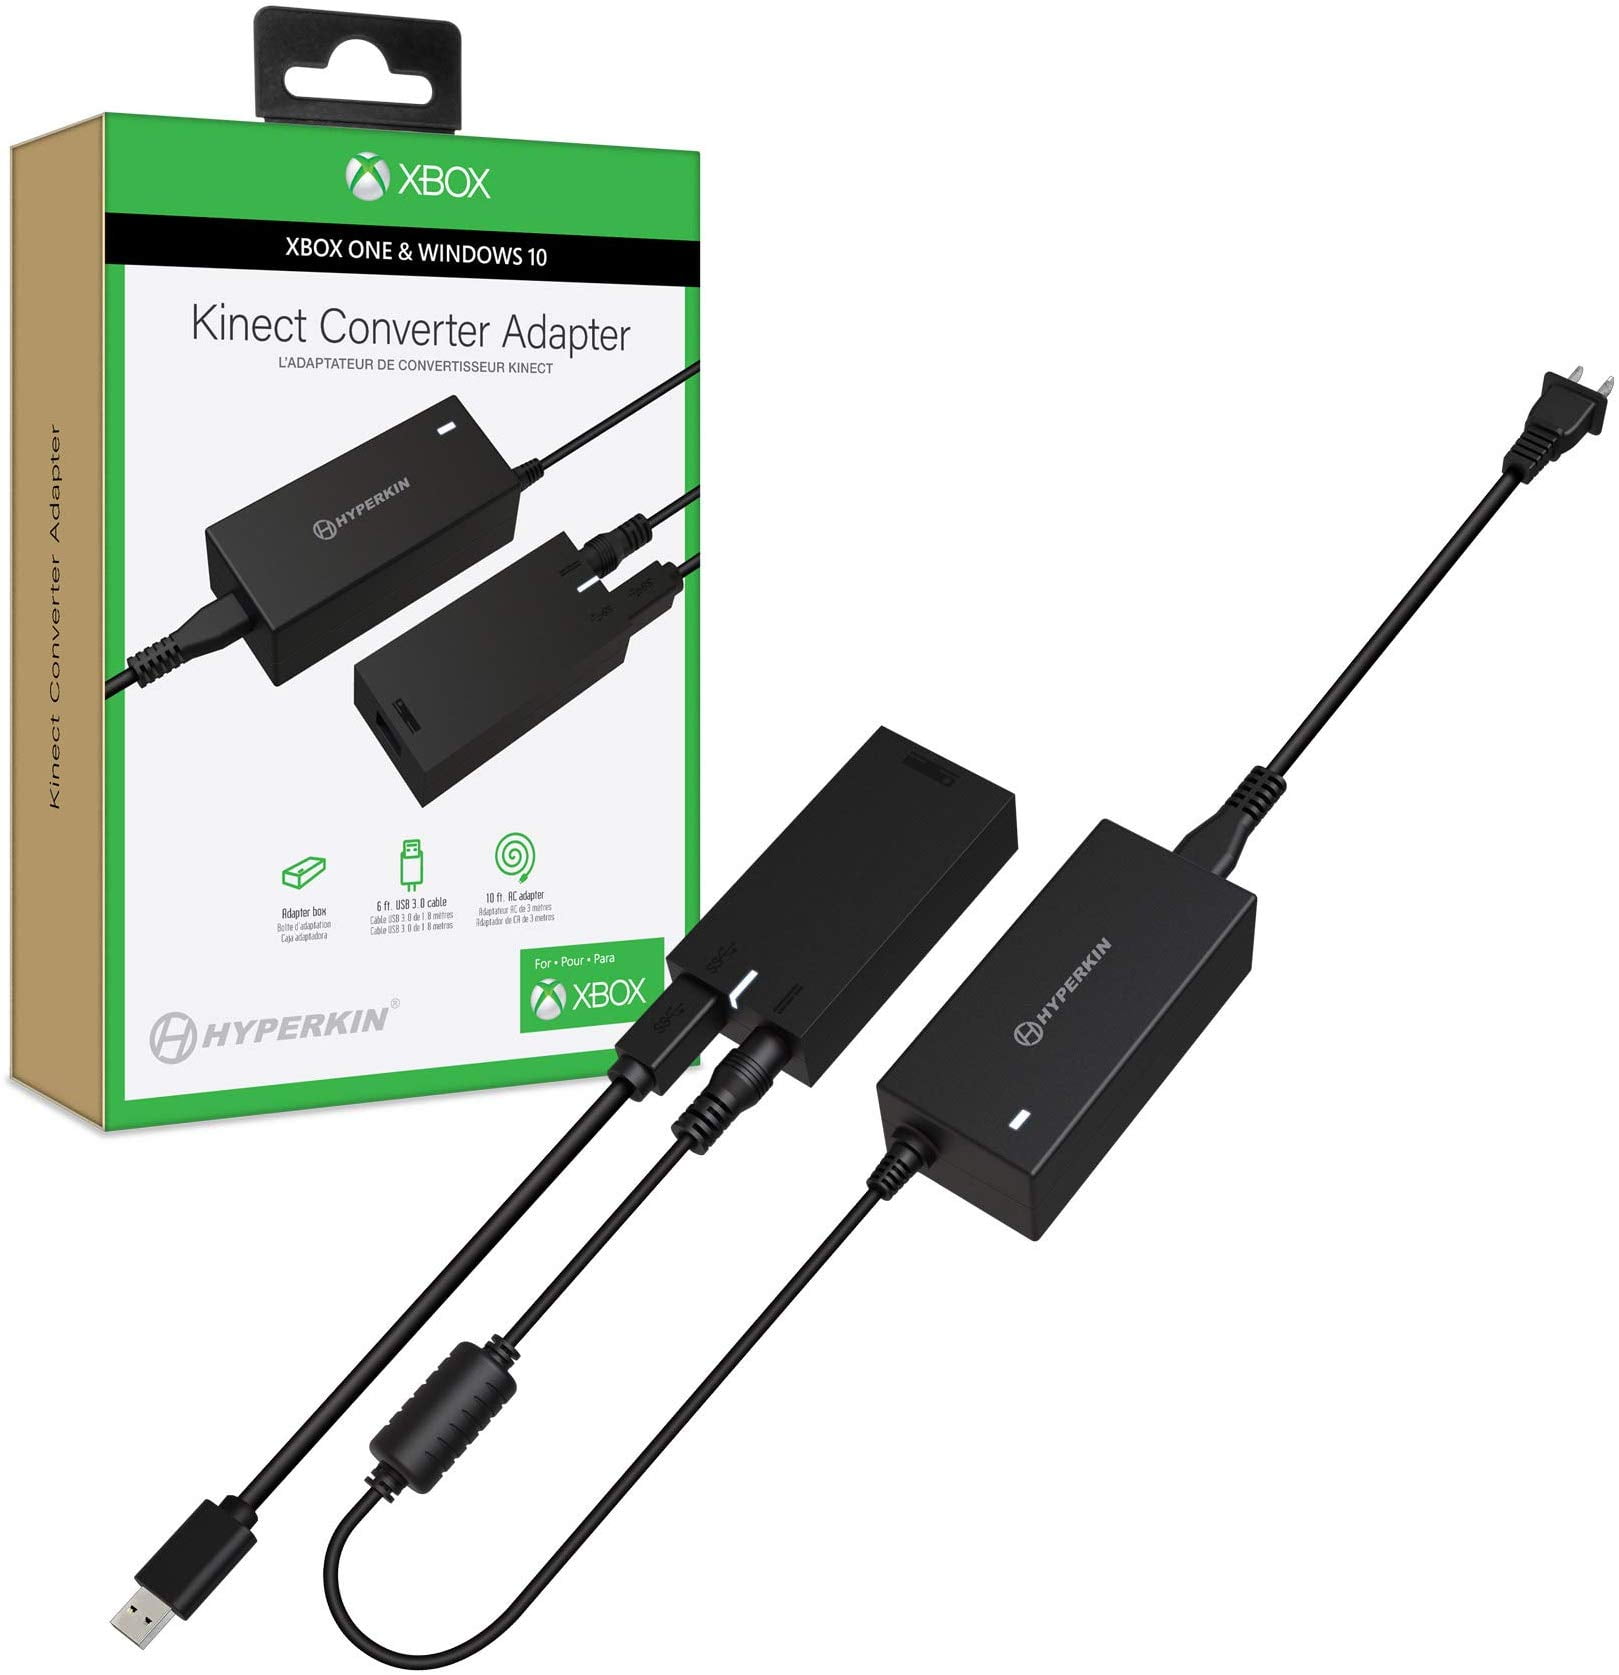 Hyperkin Kinect Converter Adapter for Xbox One S, Xbox One X, and